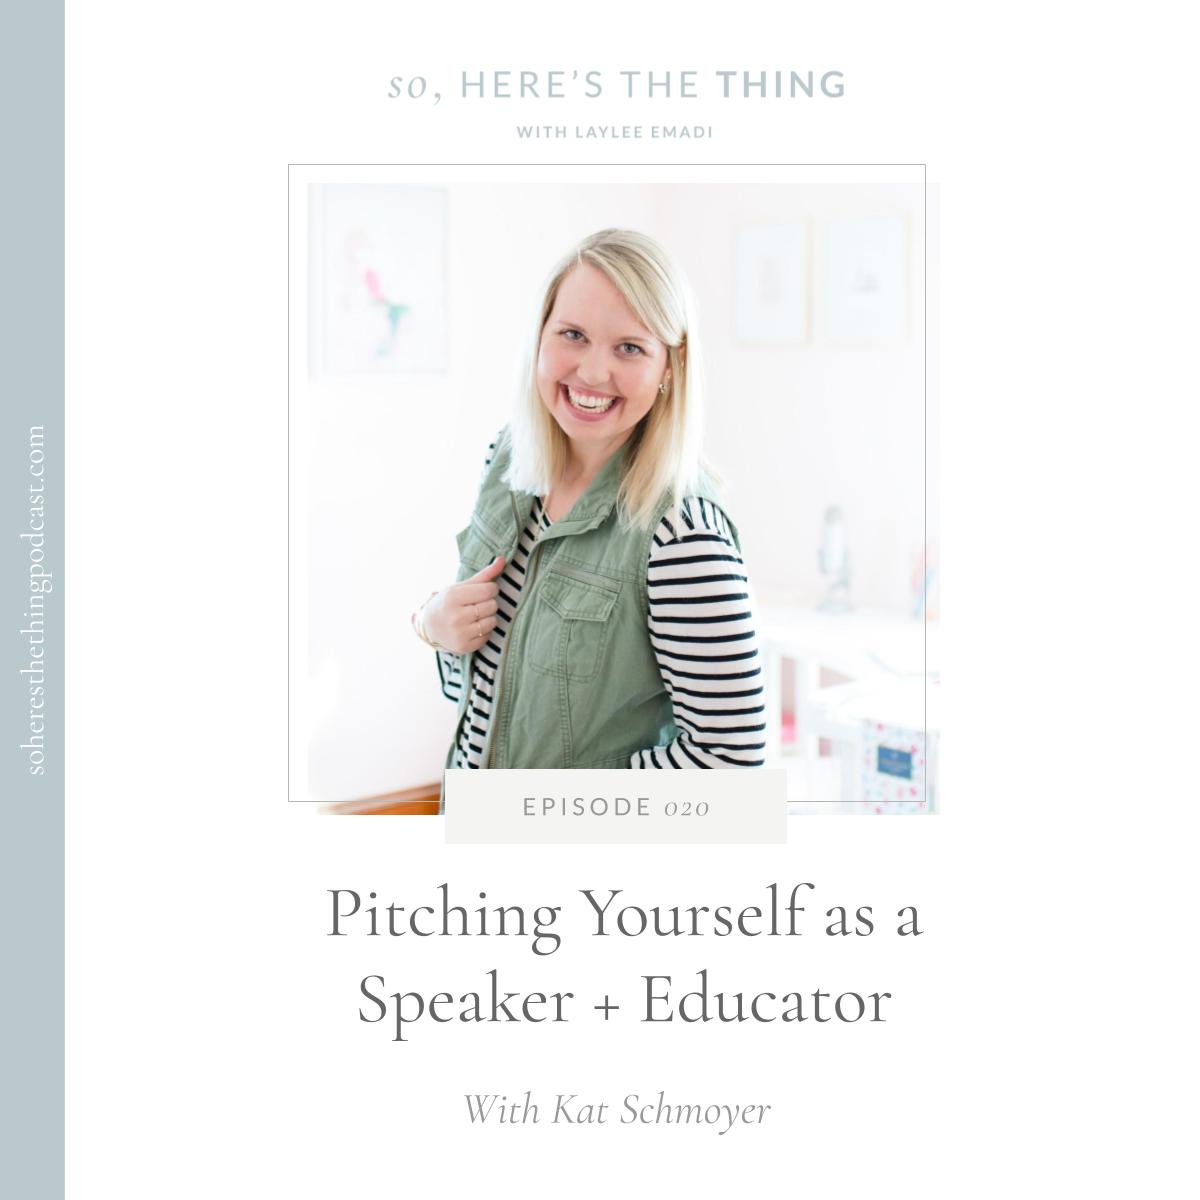 Pitching Yourself